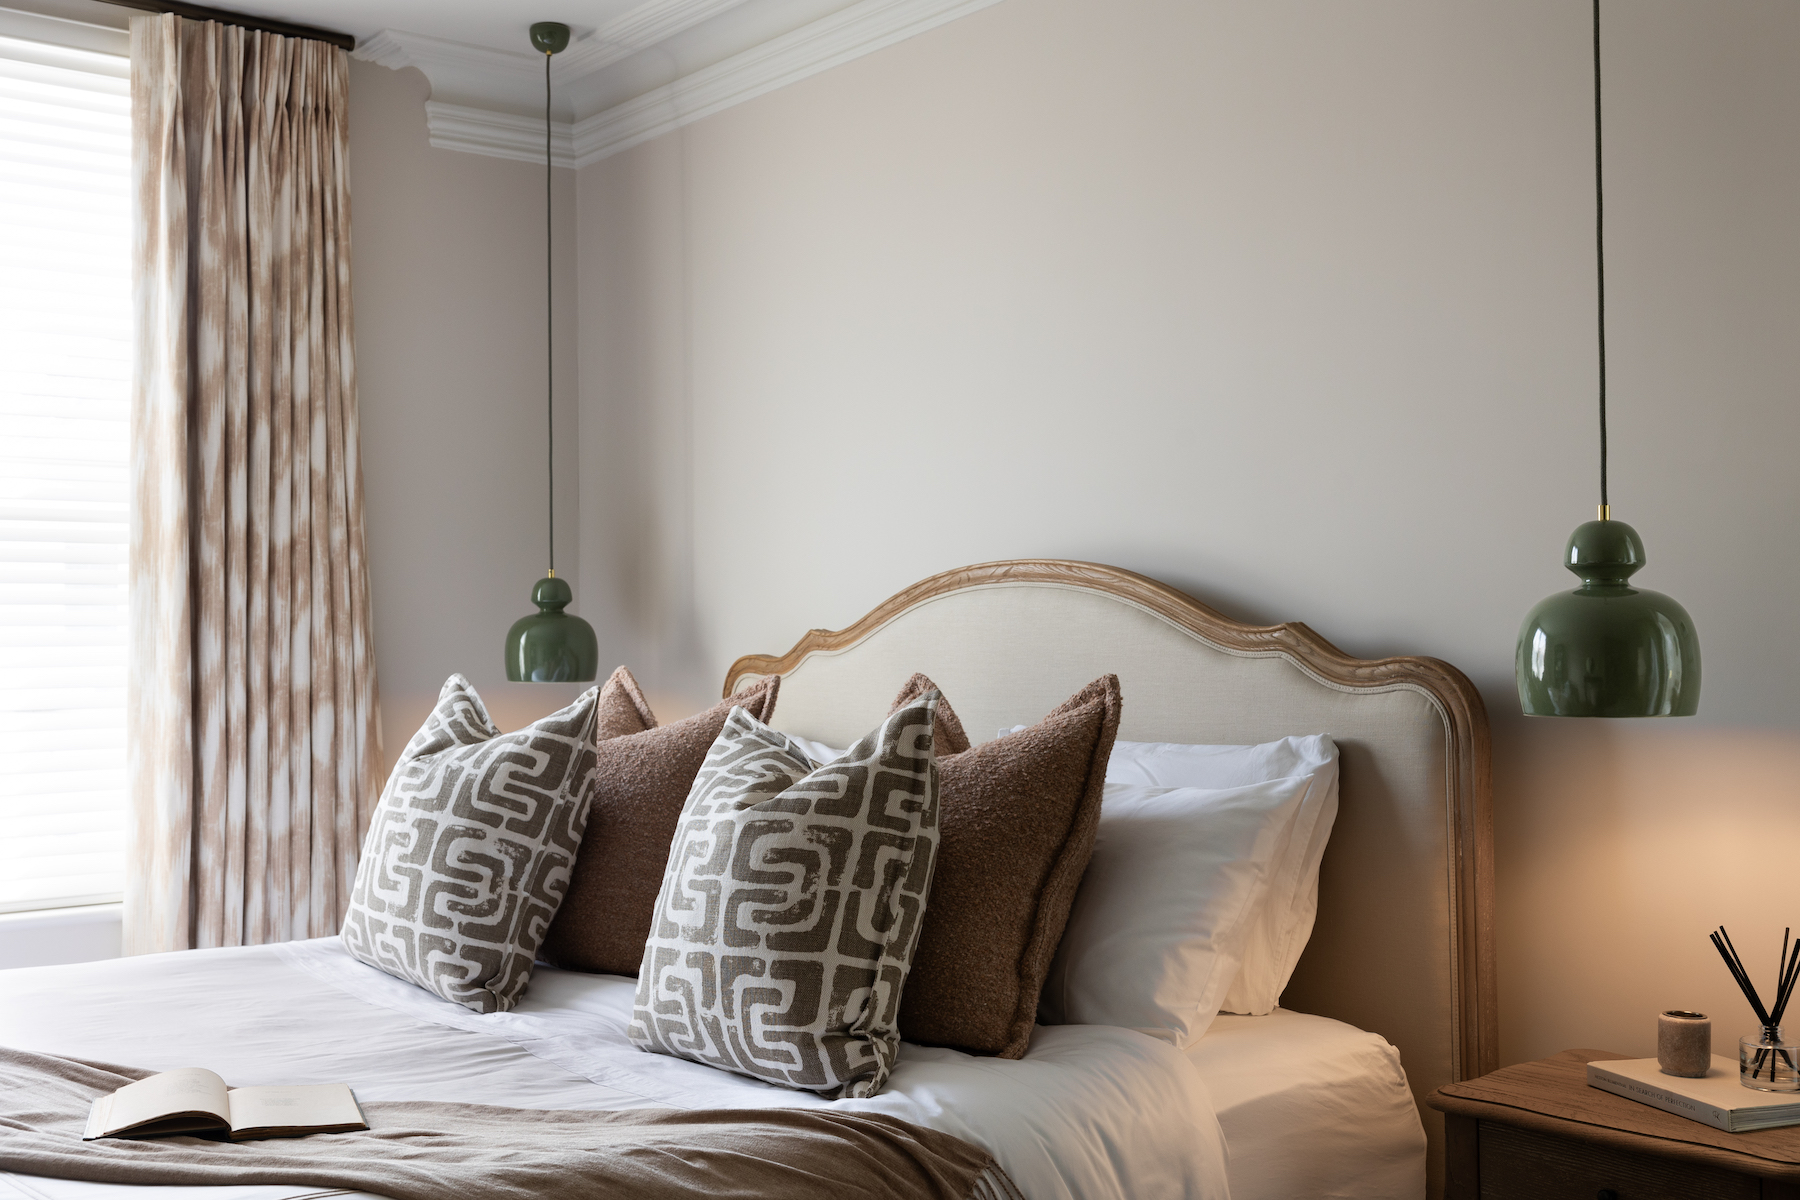 Contemporary Bedroom Designed with Bespoke headboard and Lighting Design by Pfeiffer Design. Neutral colour palette with warmth